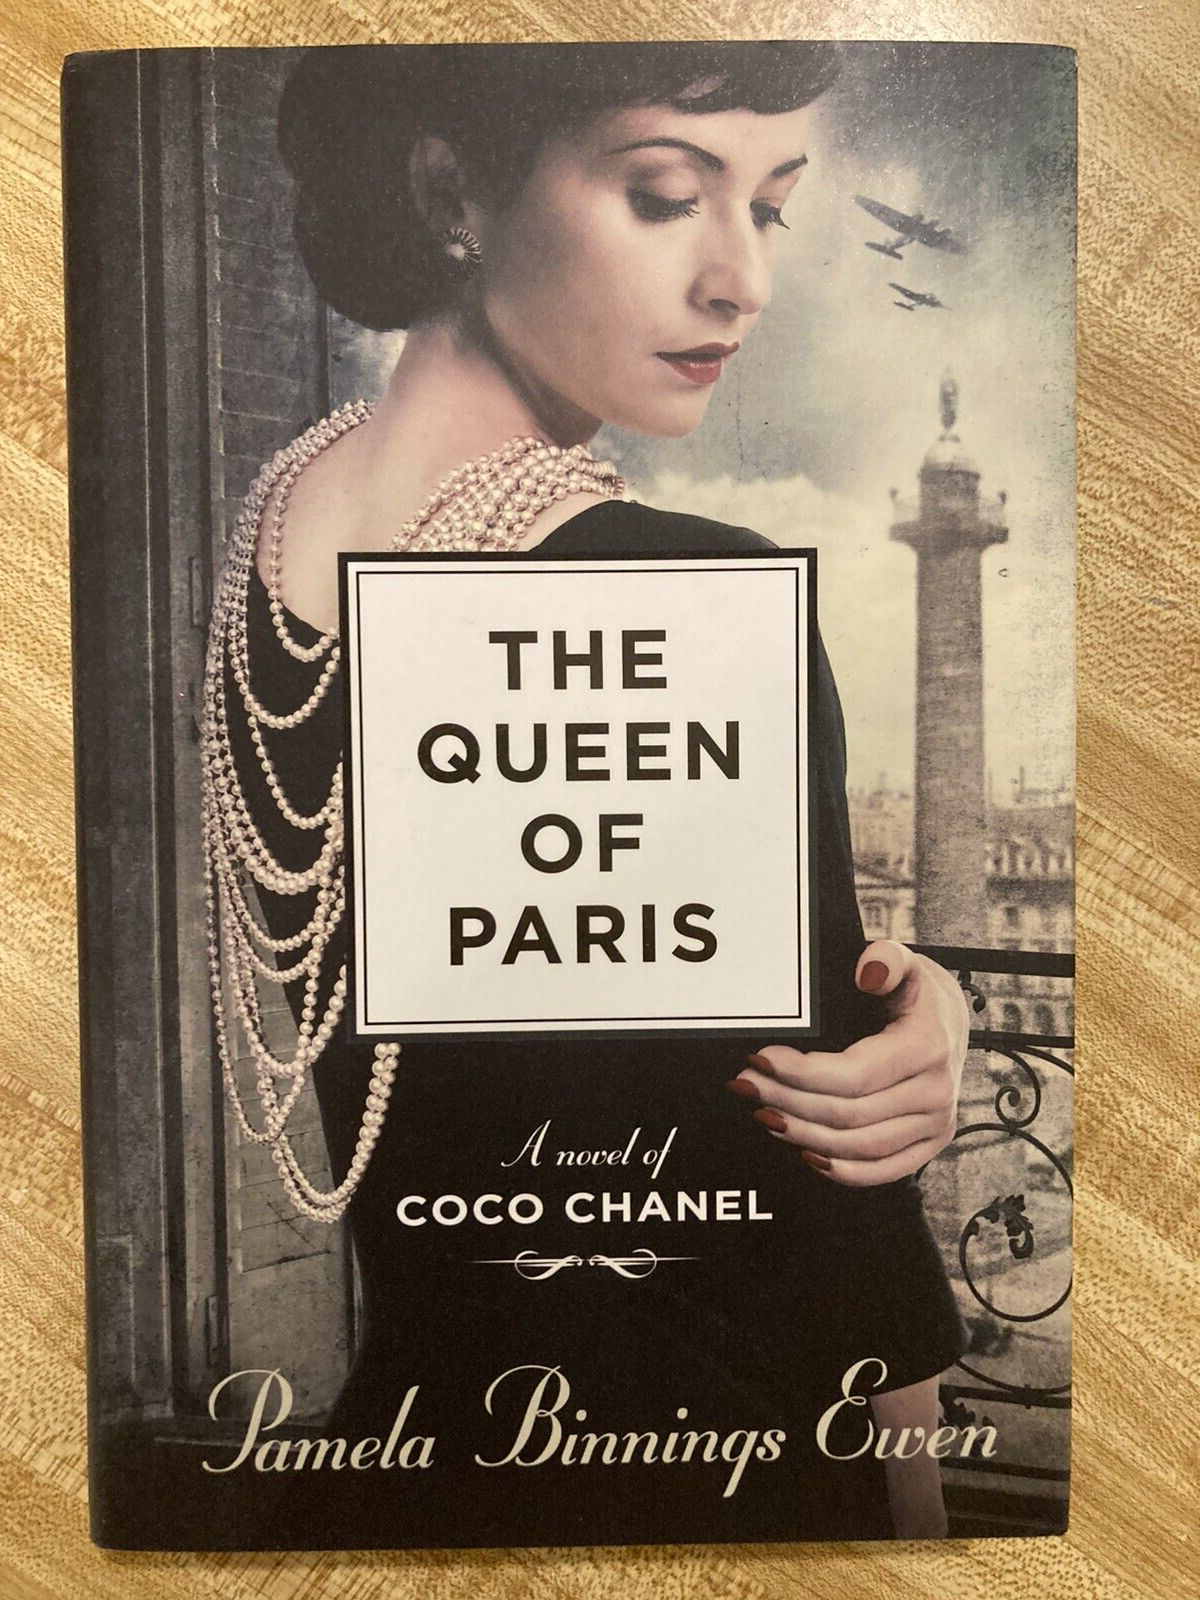 The Queen of Paris : A Novel of Coco Chanel by Pamela Binnings Ewen (2020,  Hardcover) for sale online